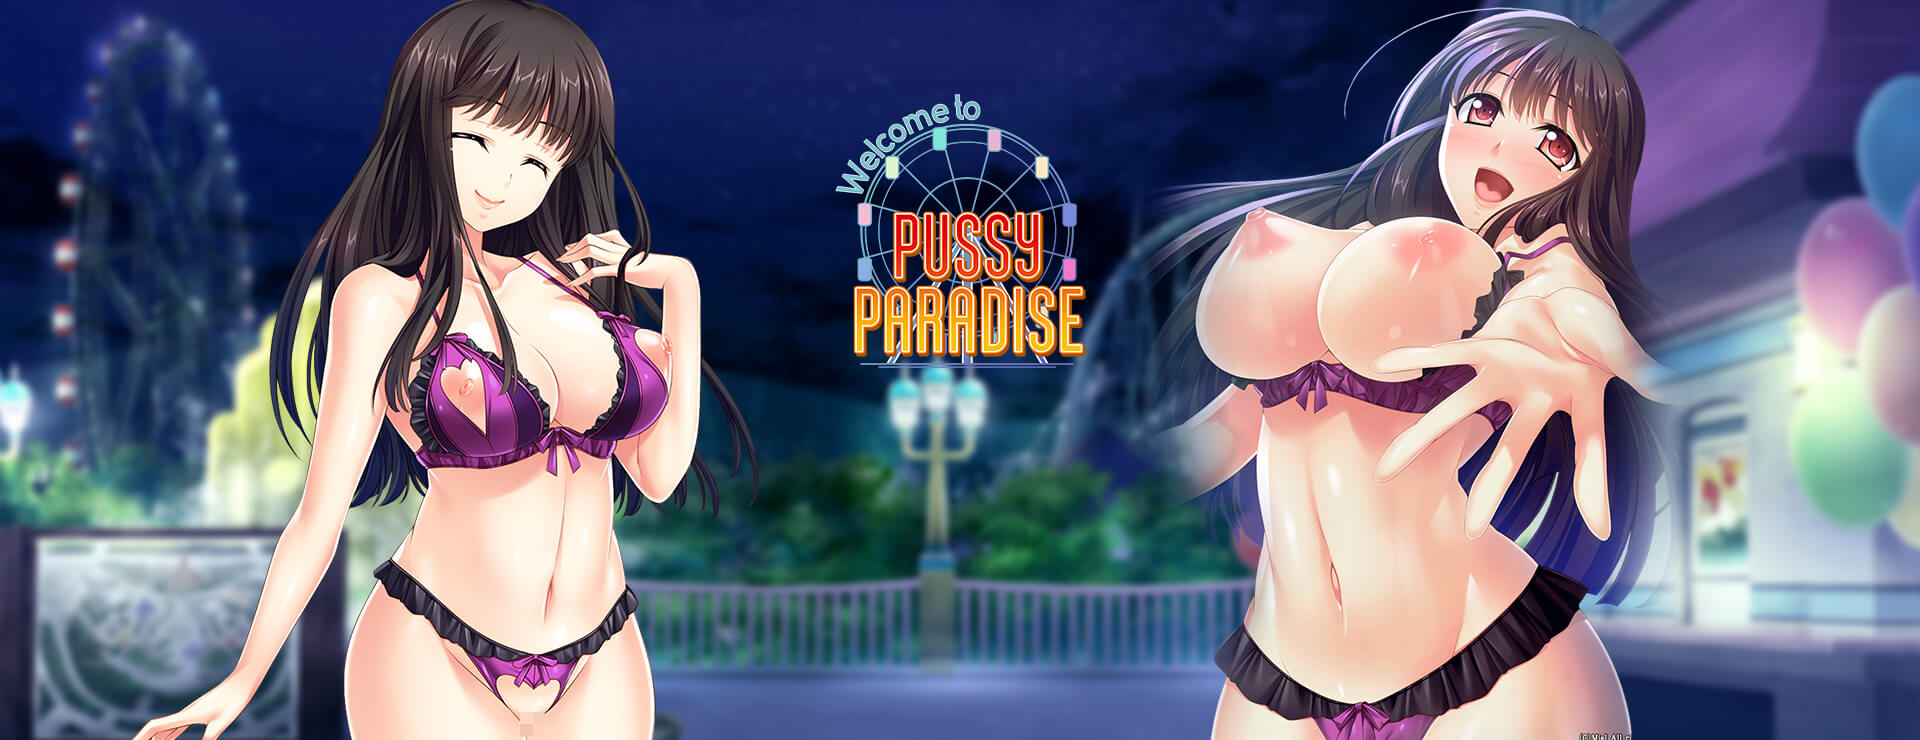 Welcome to Pussy Paradise - Visual Novel Game. 